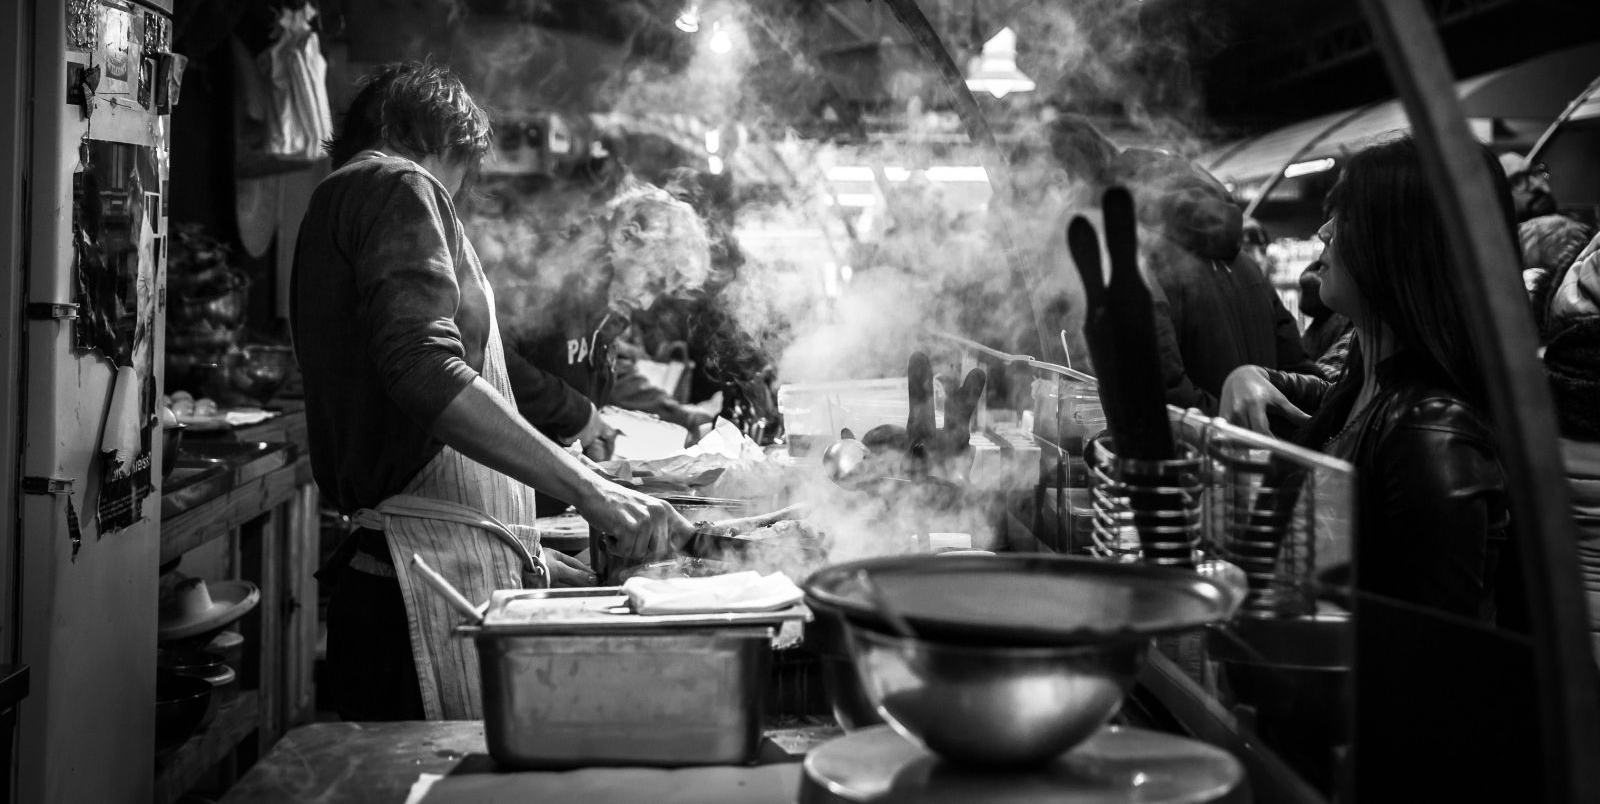 Chef in a Smoky Kitchen